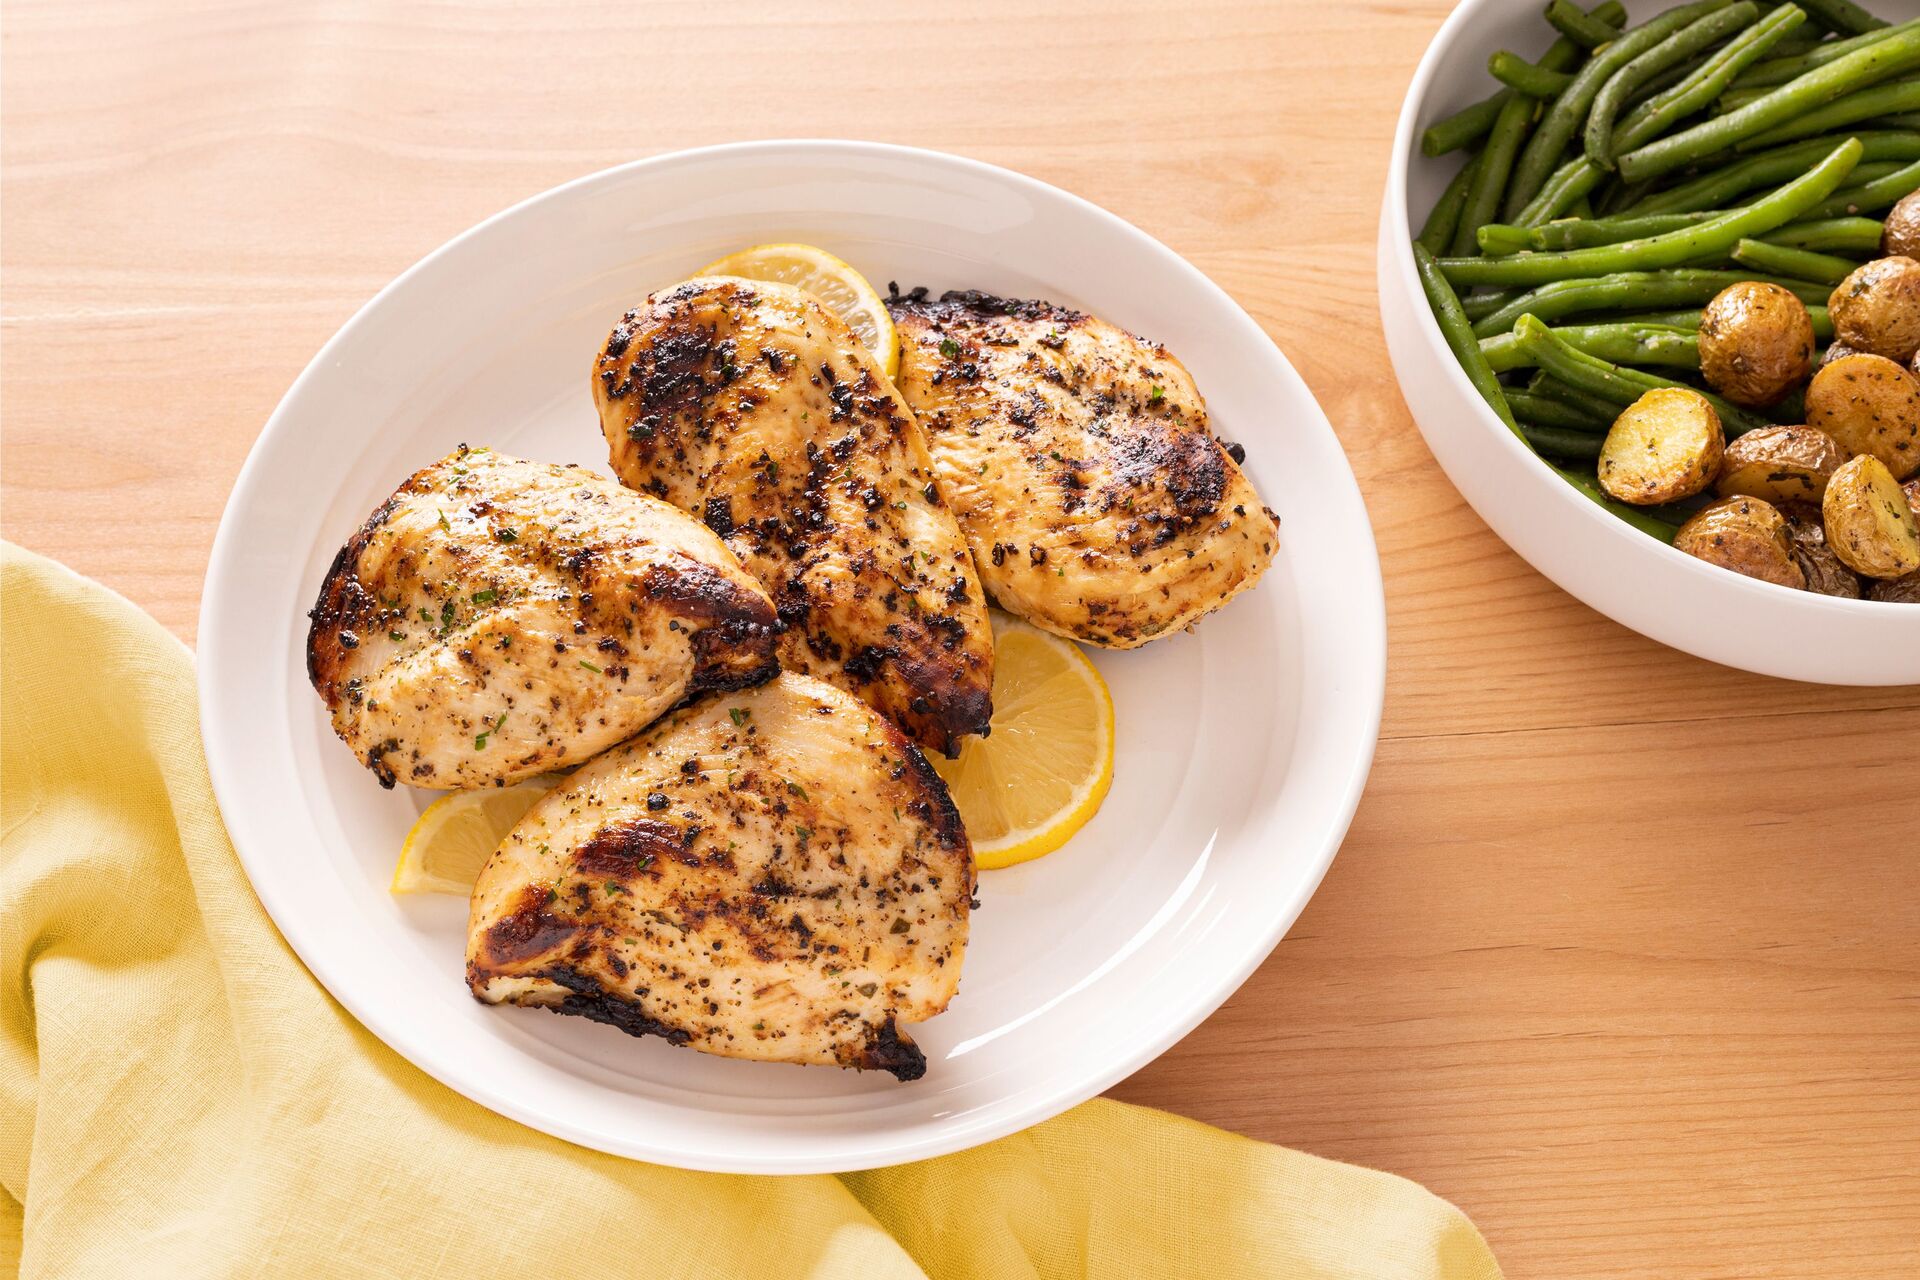 How To Broil Chicken In An Electric Skillet